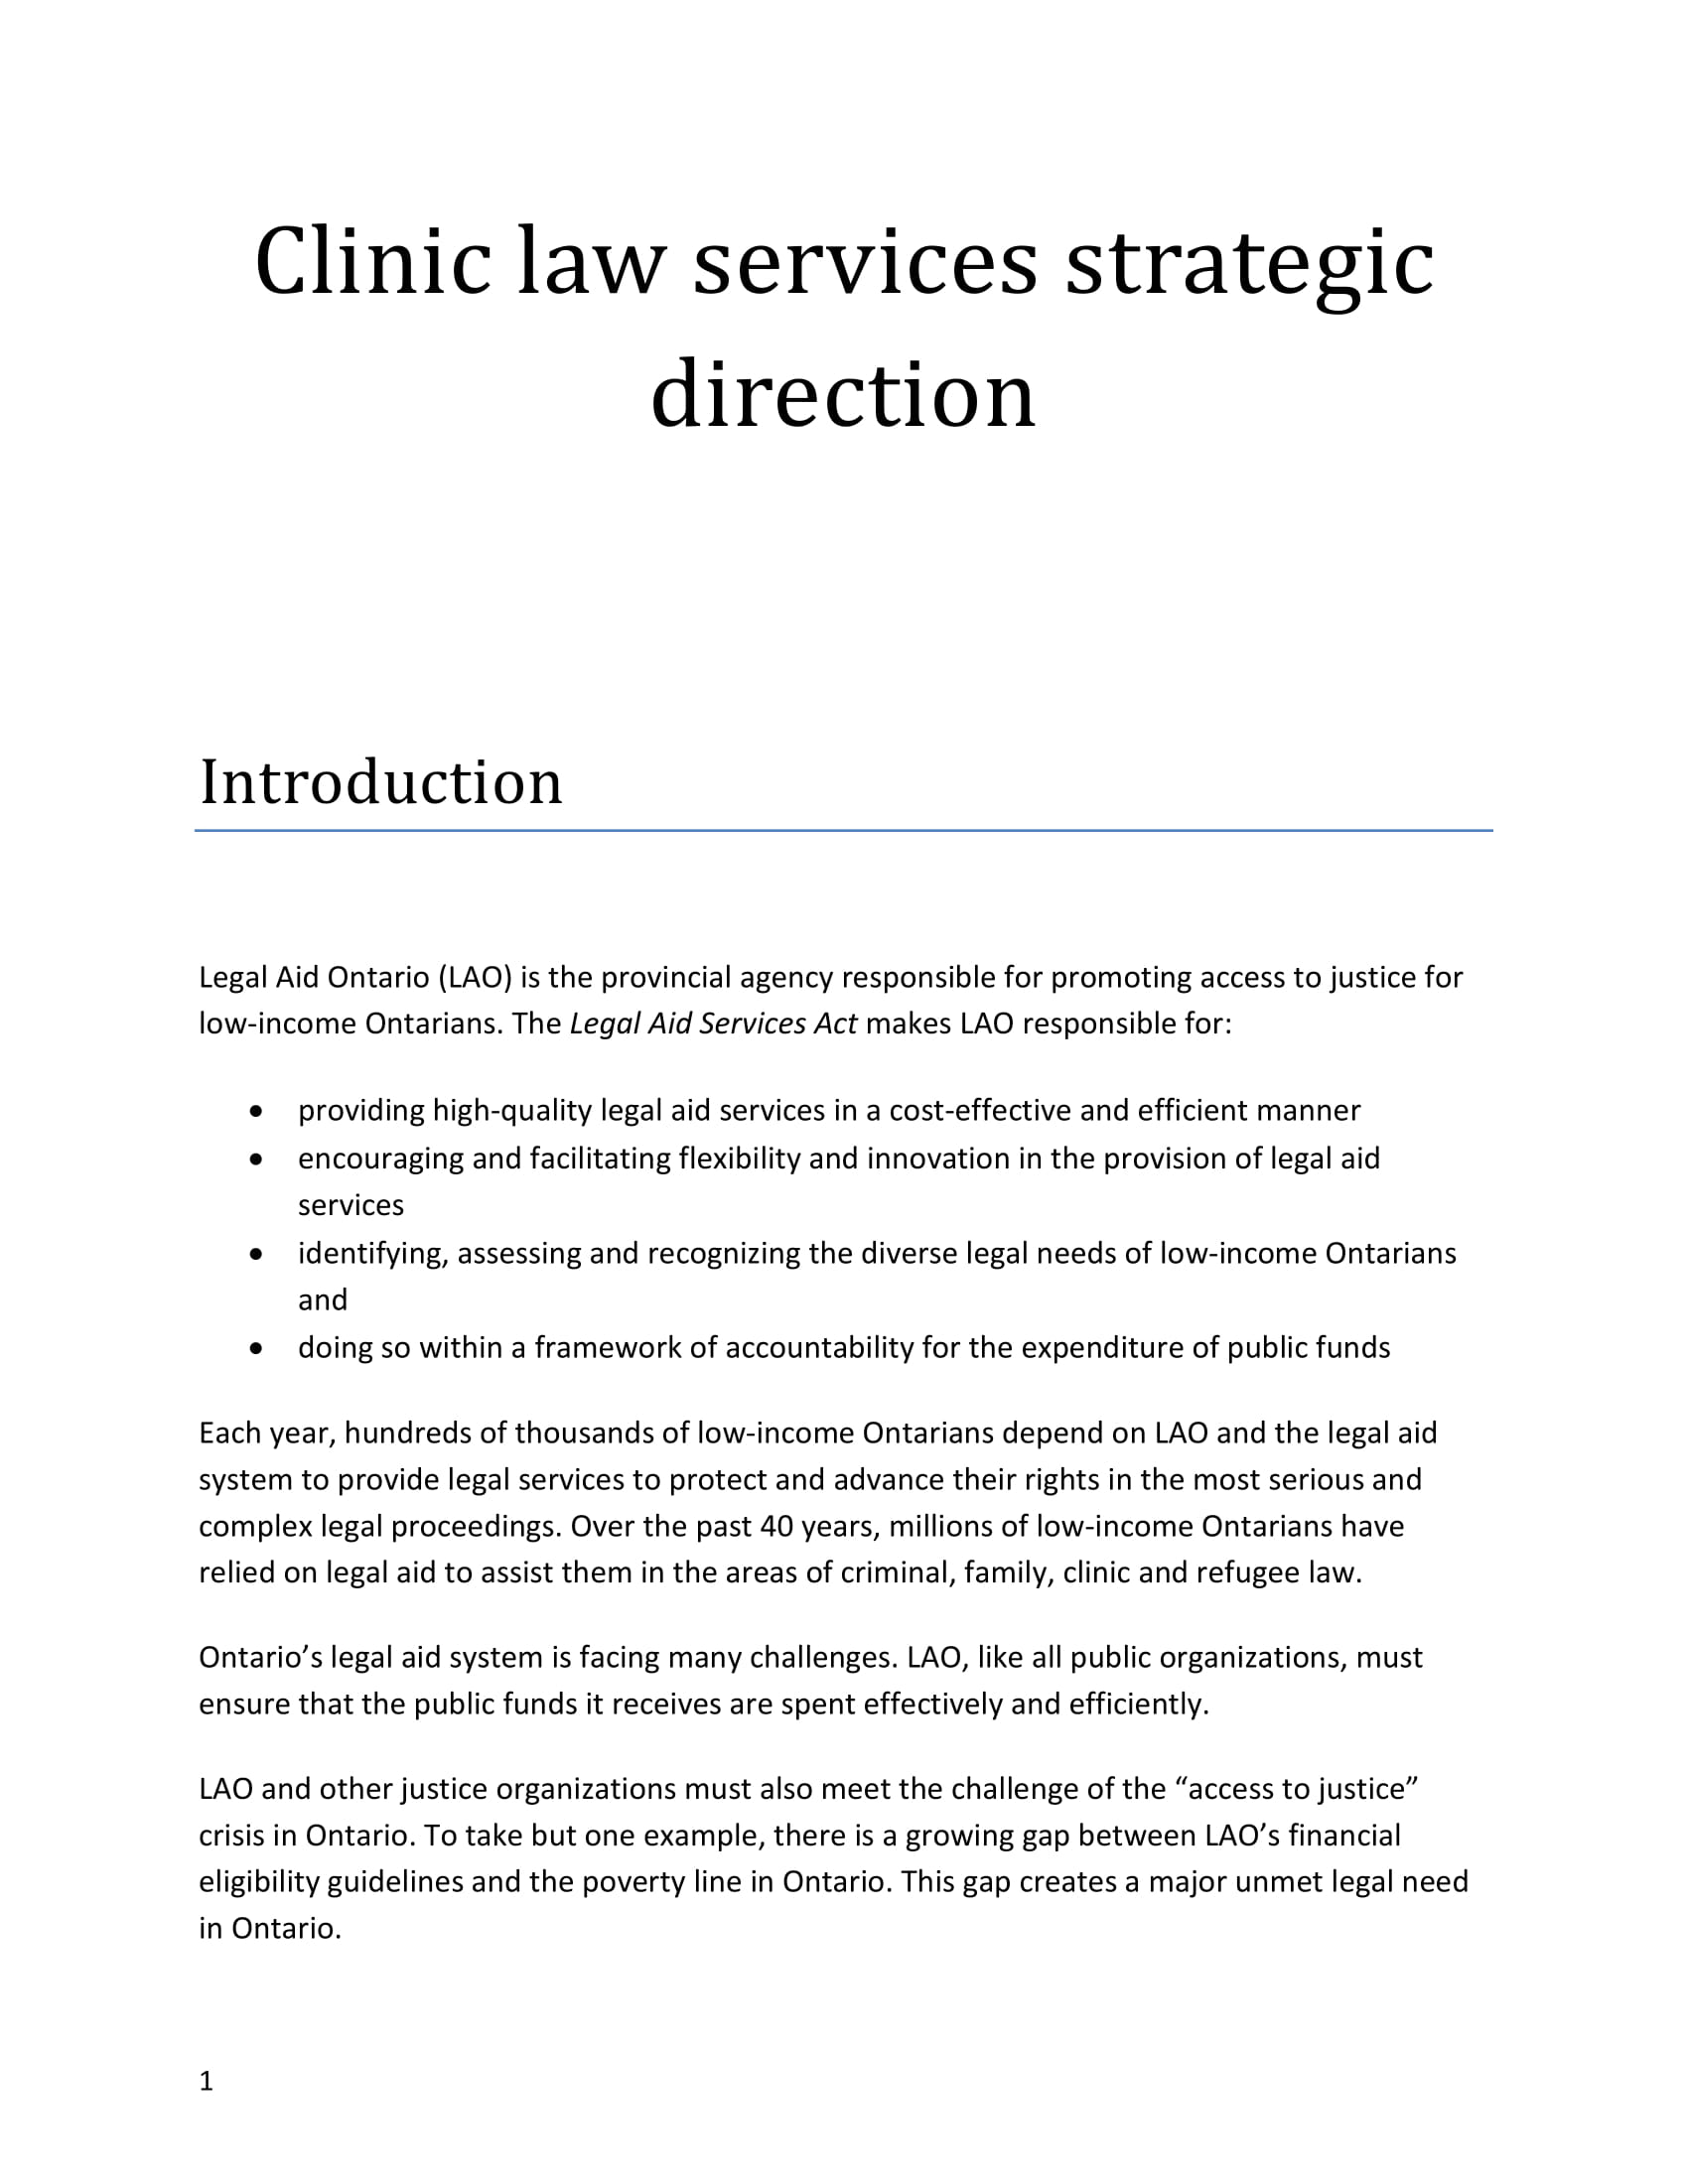 clinic law services strategic direction planning example 01